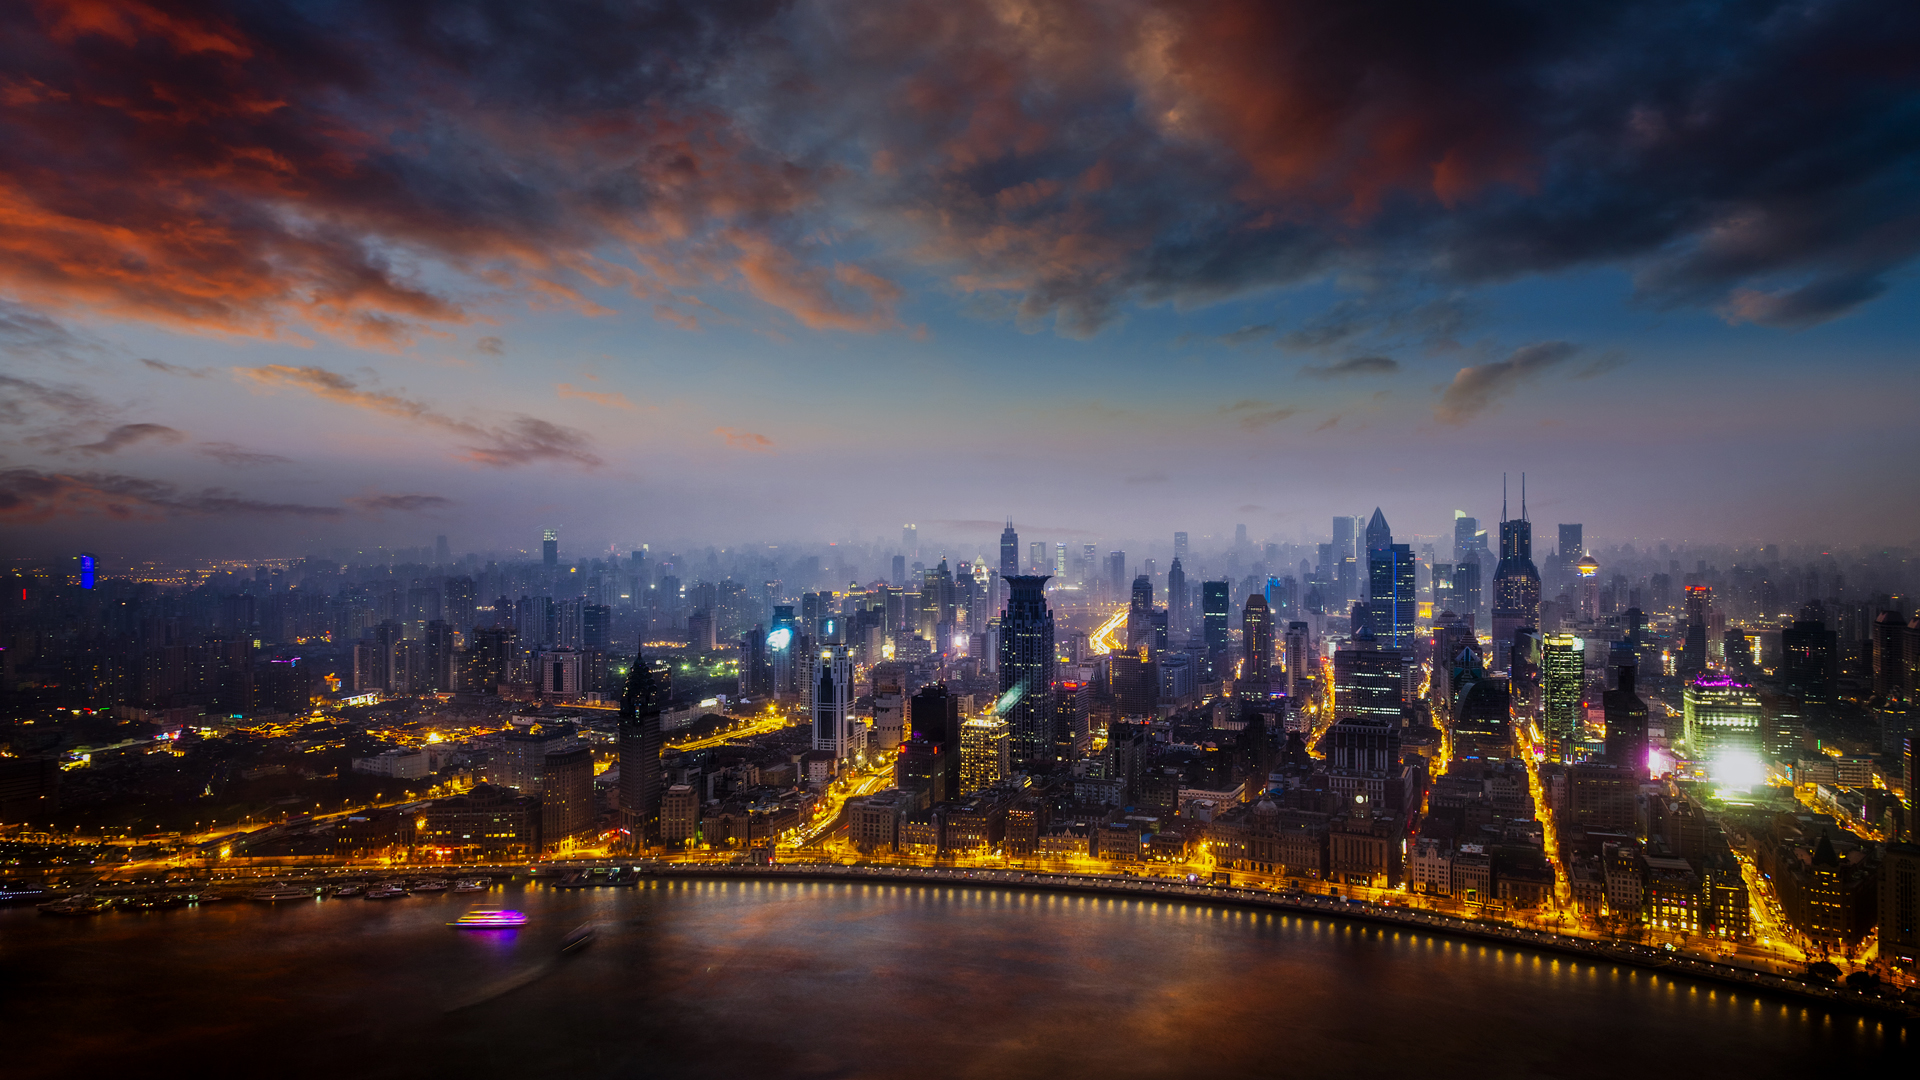 General 1920x1080 nature landscape far view clouds sky night sunset lights water skyscraper road boat mist cityscape Shanghai China